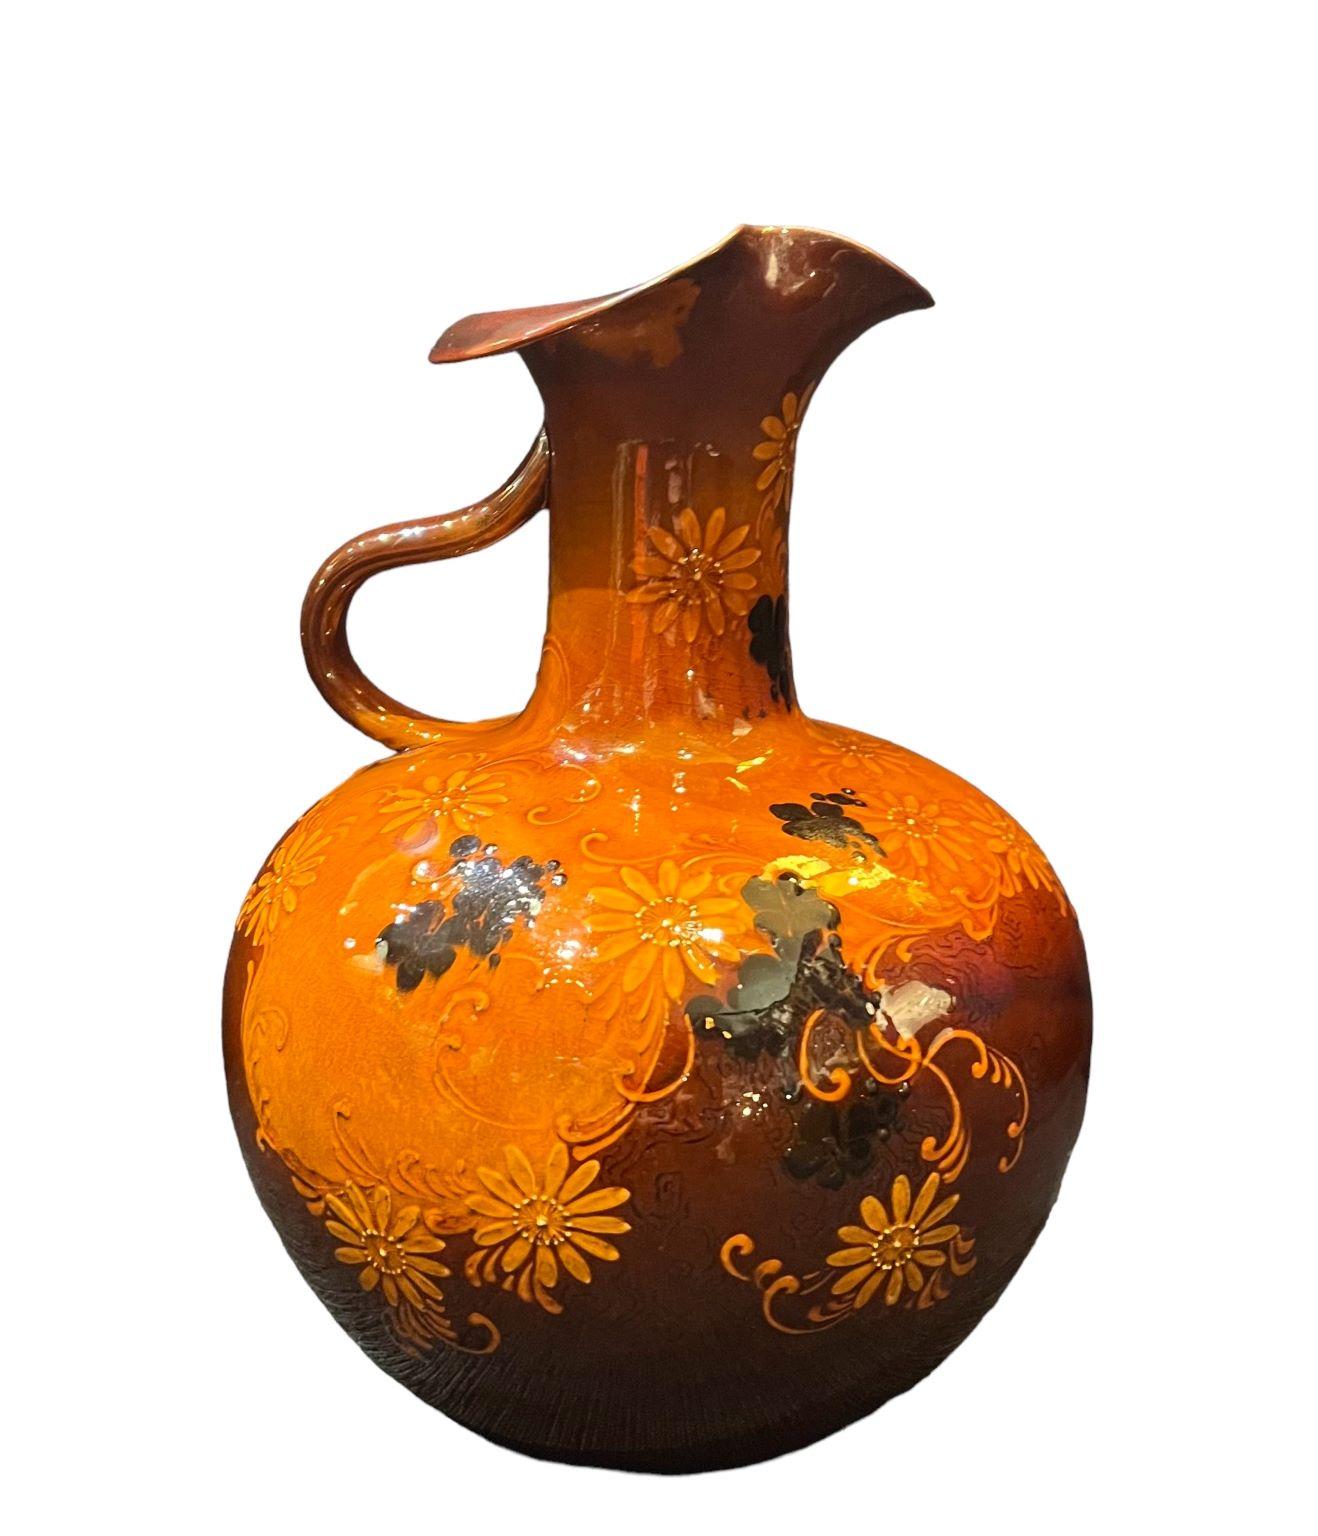 Art And Craft Rookwood Ewer by Kataro Shirayamadani 1902. A beautiful piece of Rookwood Pottery with raised decoration. Signed on bottom. Dimensions 9 inches tall, by 6.5 inches wide